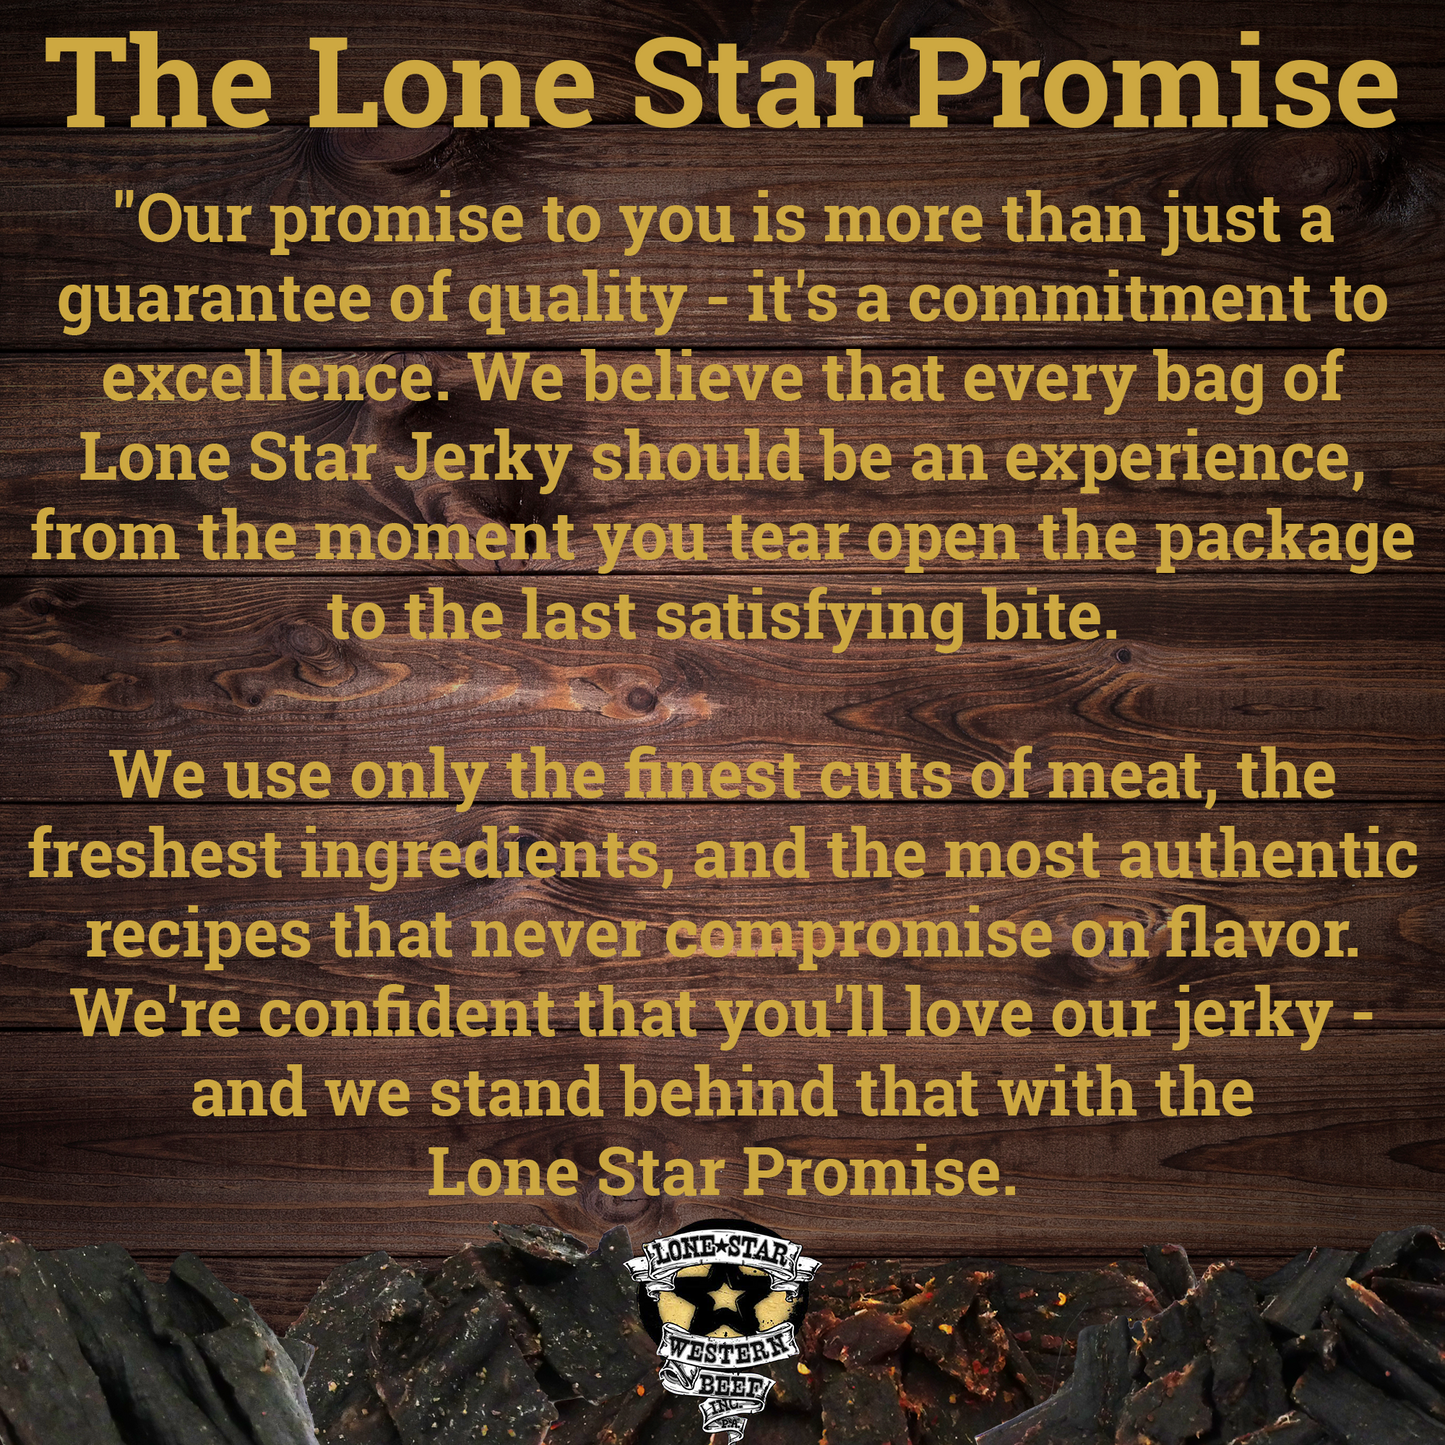 Lone Star Teriyaki Beef Jerky - 1 Pound - Resealable Bag - Savory Handcrafted Flavor - Made in the USA